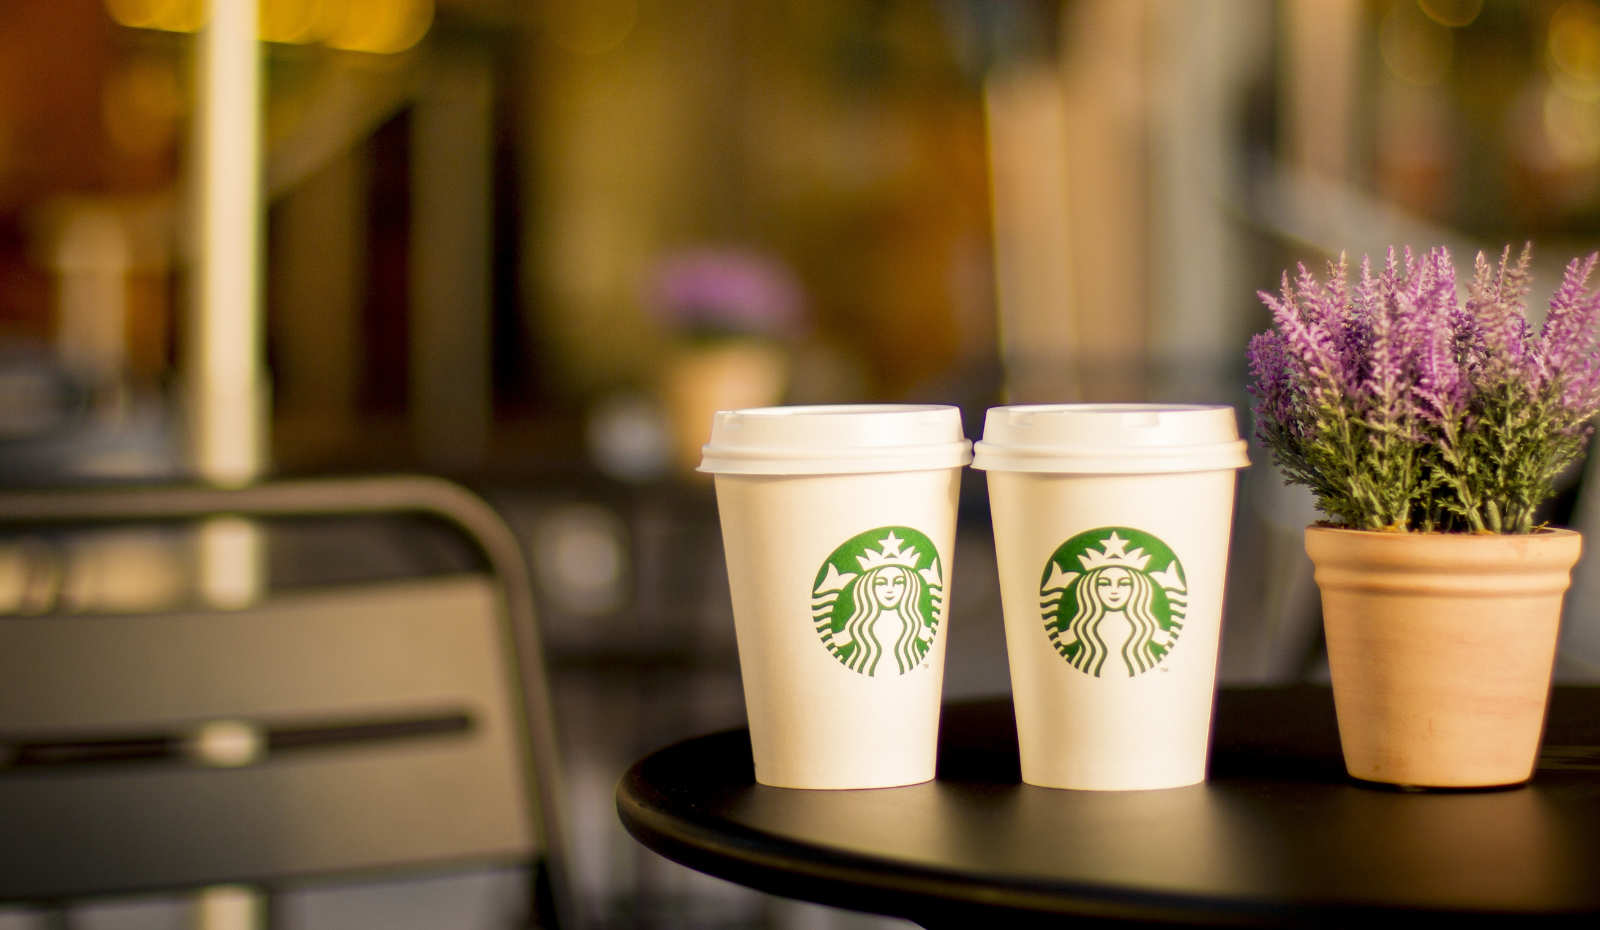 Two Starbucks cups on a table.